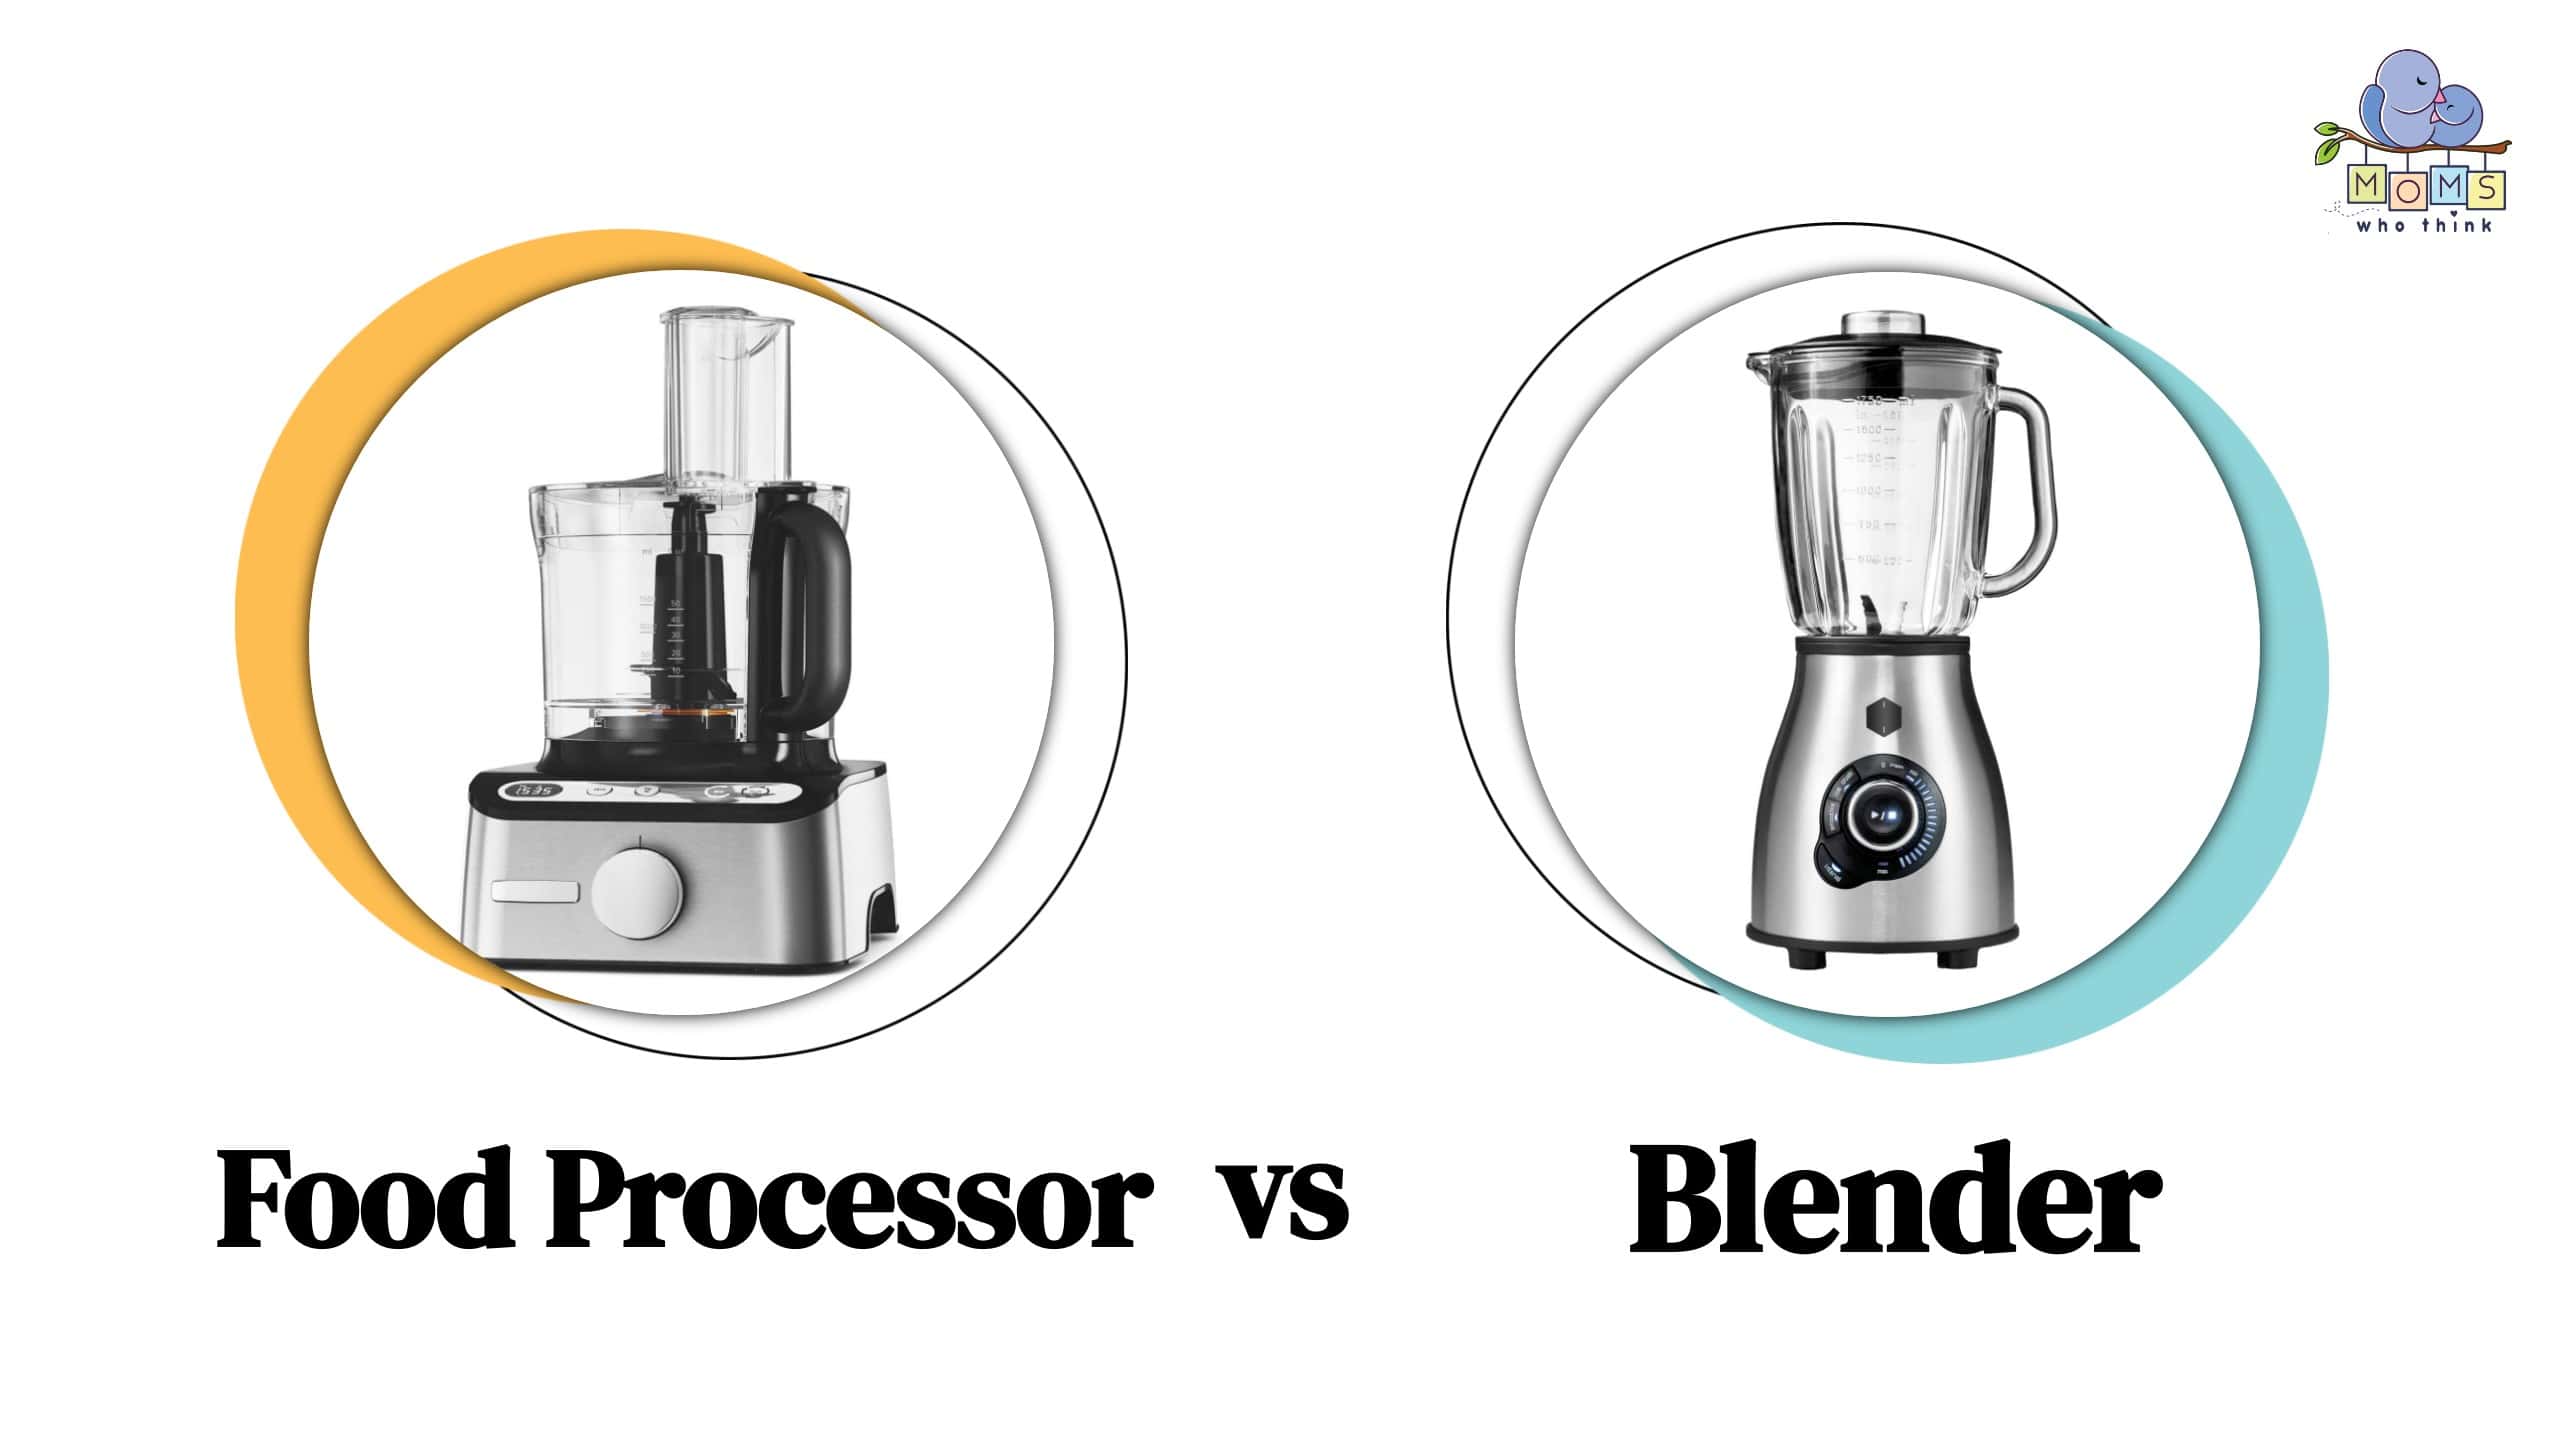 Blender vs. Food Processor: What's the Difference?